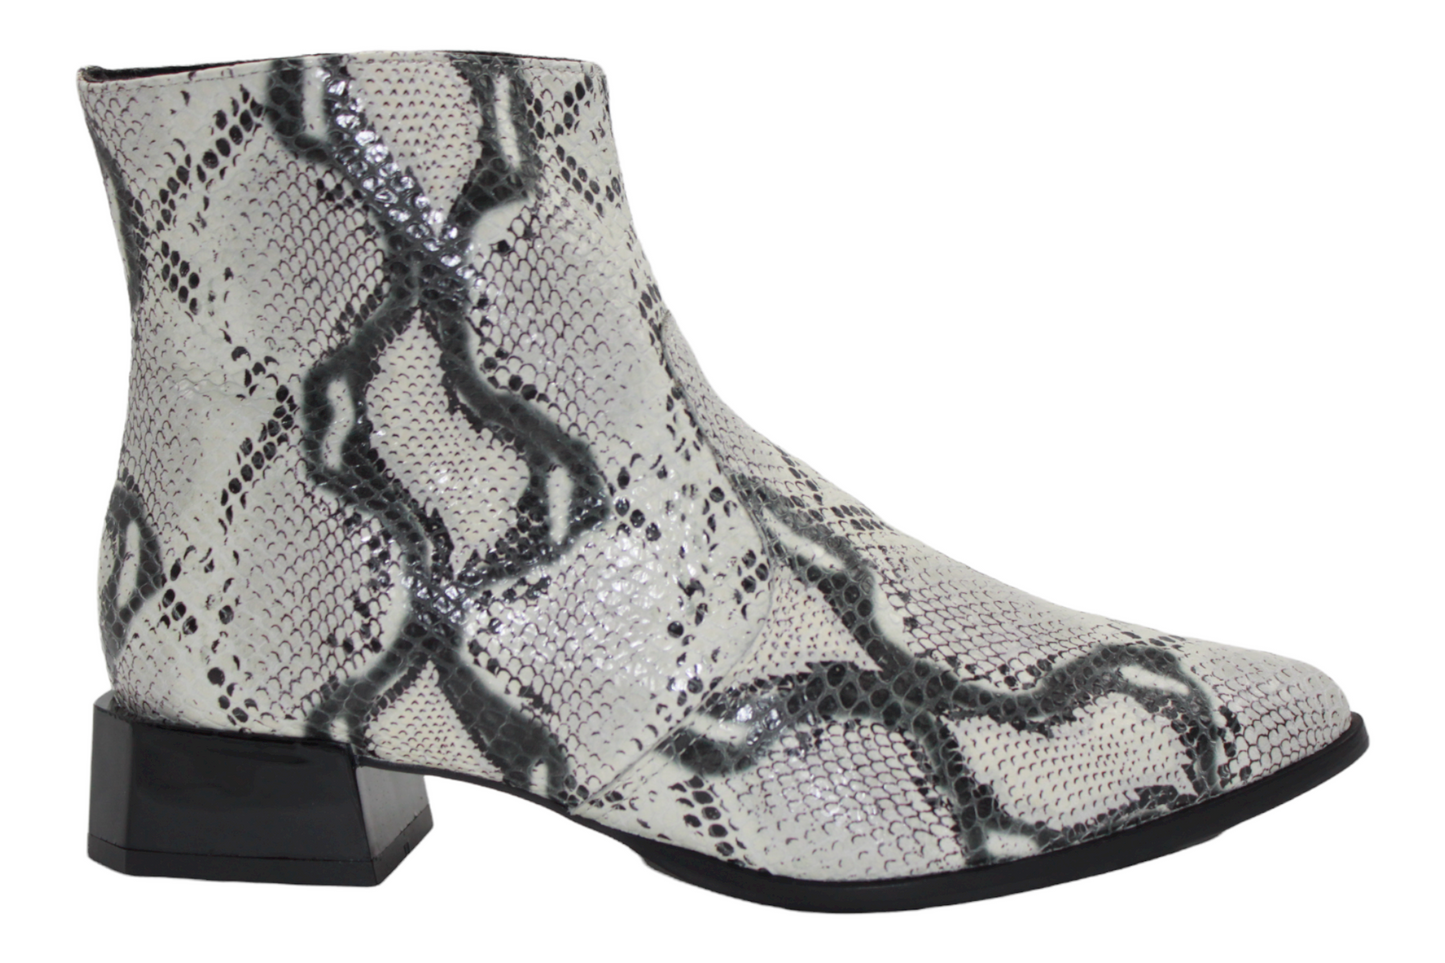 Leather Snake Print Chelsea Boots